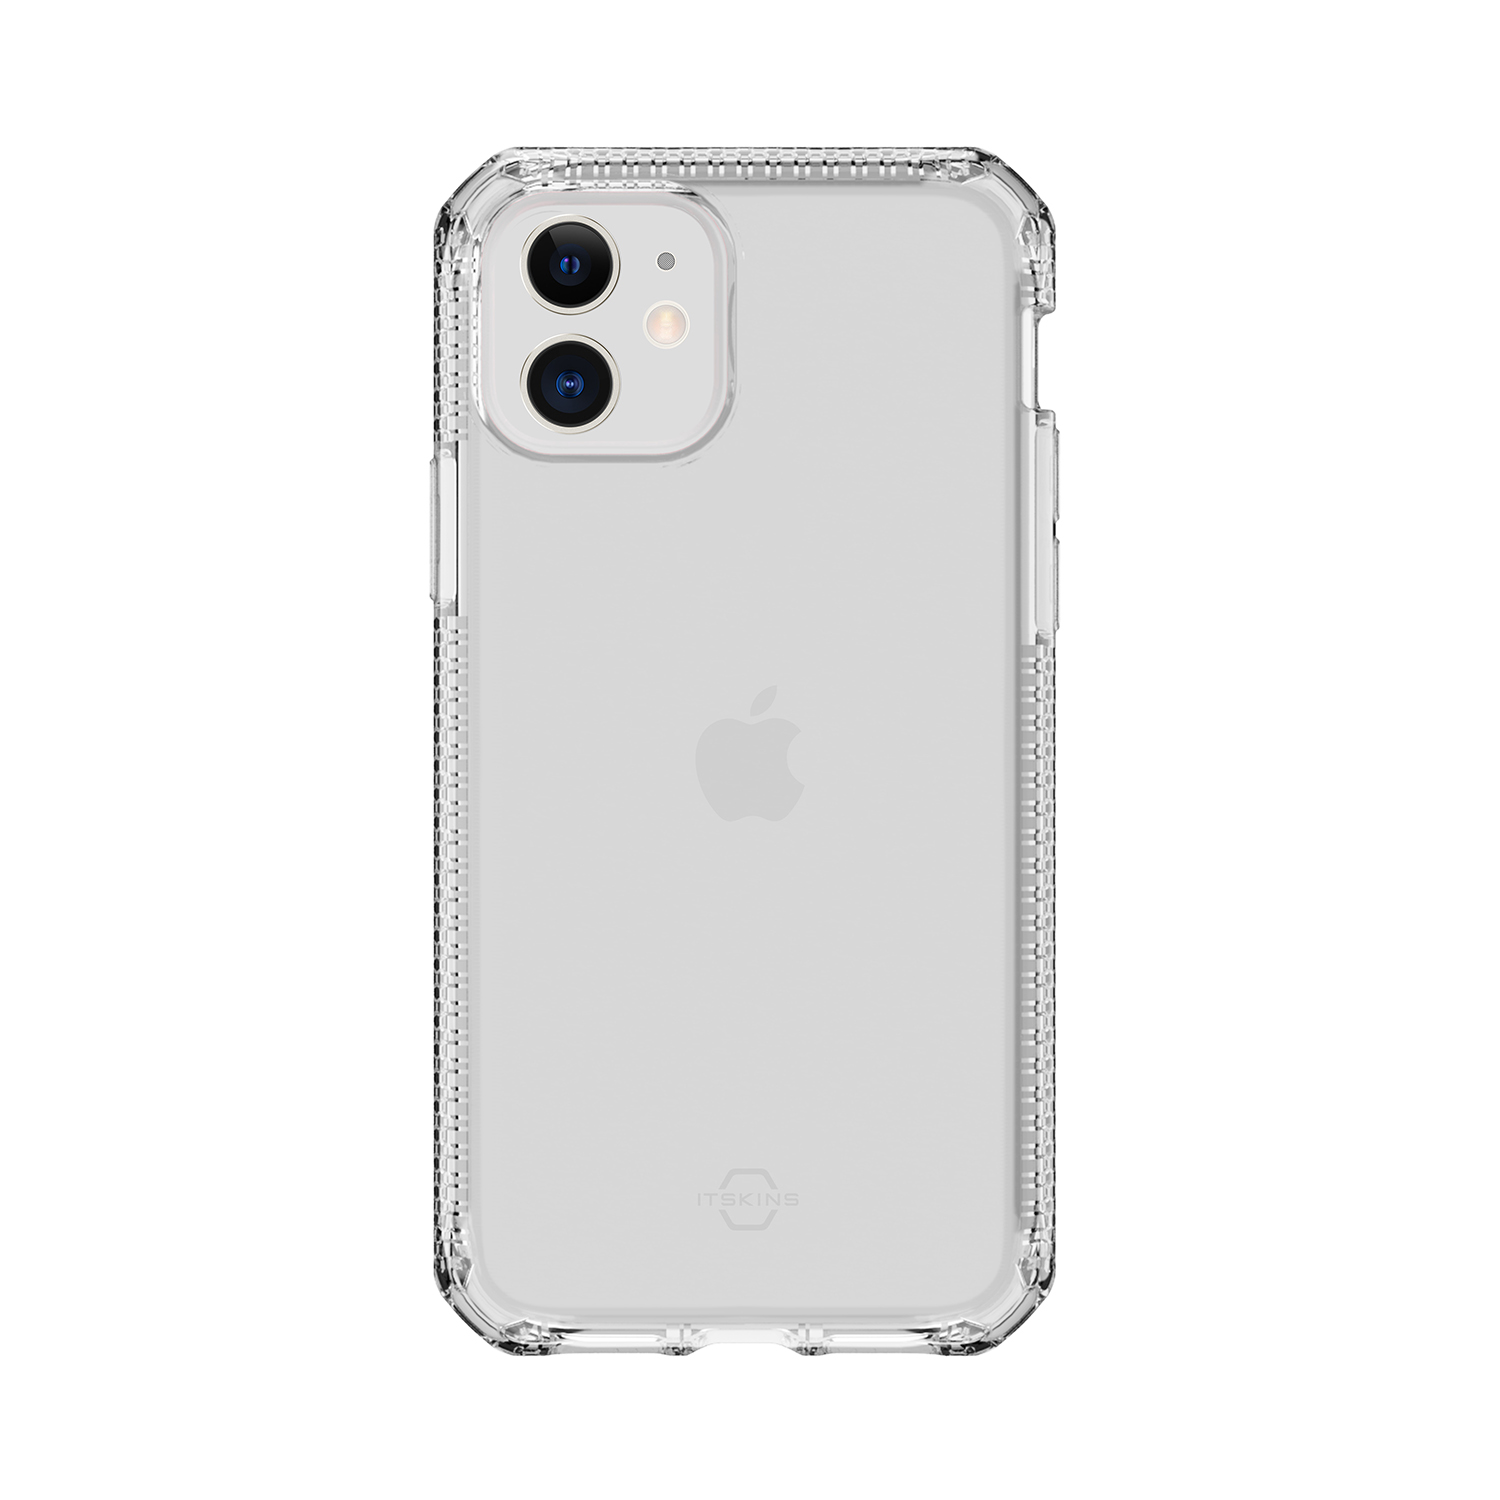 ITSKINS SPECTRUMCLEAR Case for iPhone 11, 11 Pro & 11 Pro Max